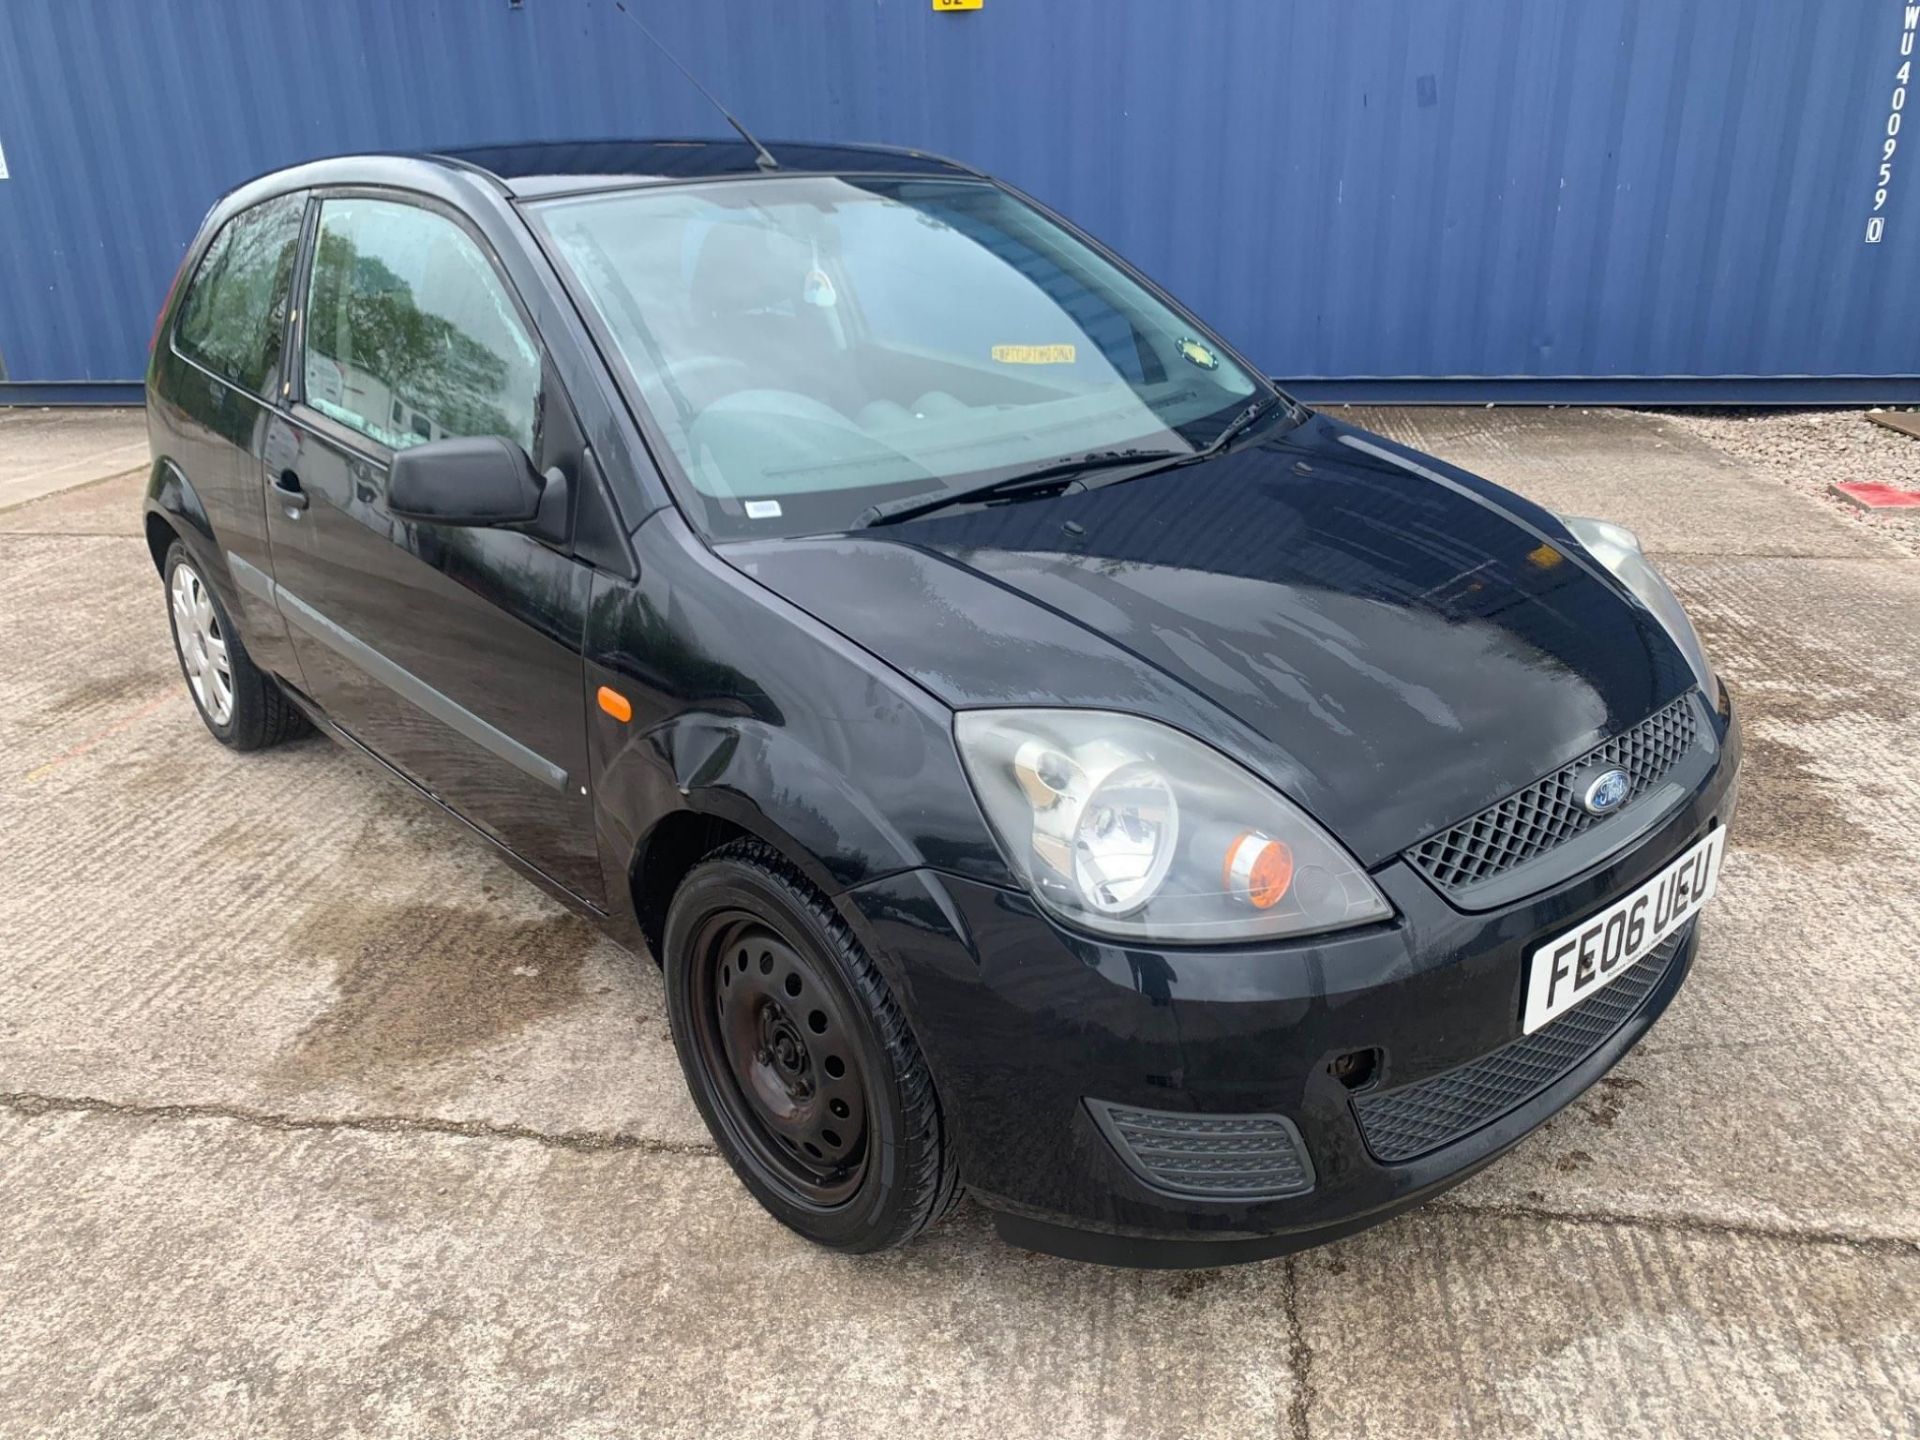 2006 Ford Fiesta 1.25 Style Climate 3 Door Hatchback - CL505 - NO VAT ON THE HAMMER - Location: Corb